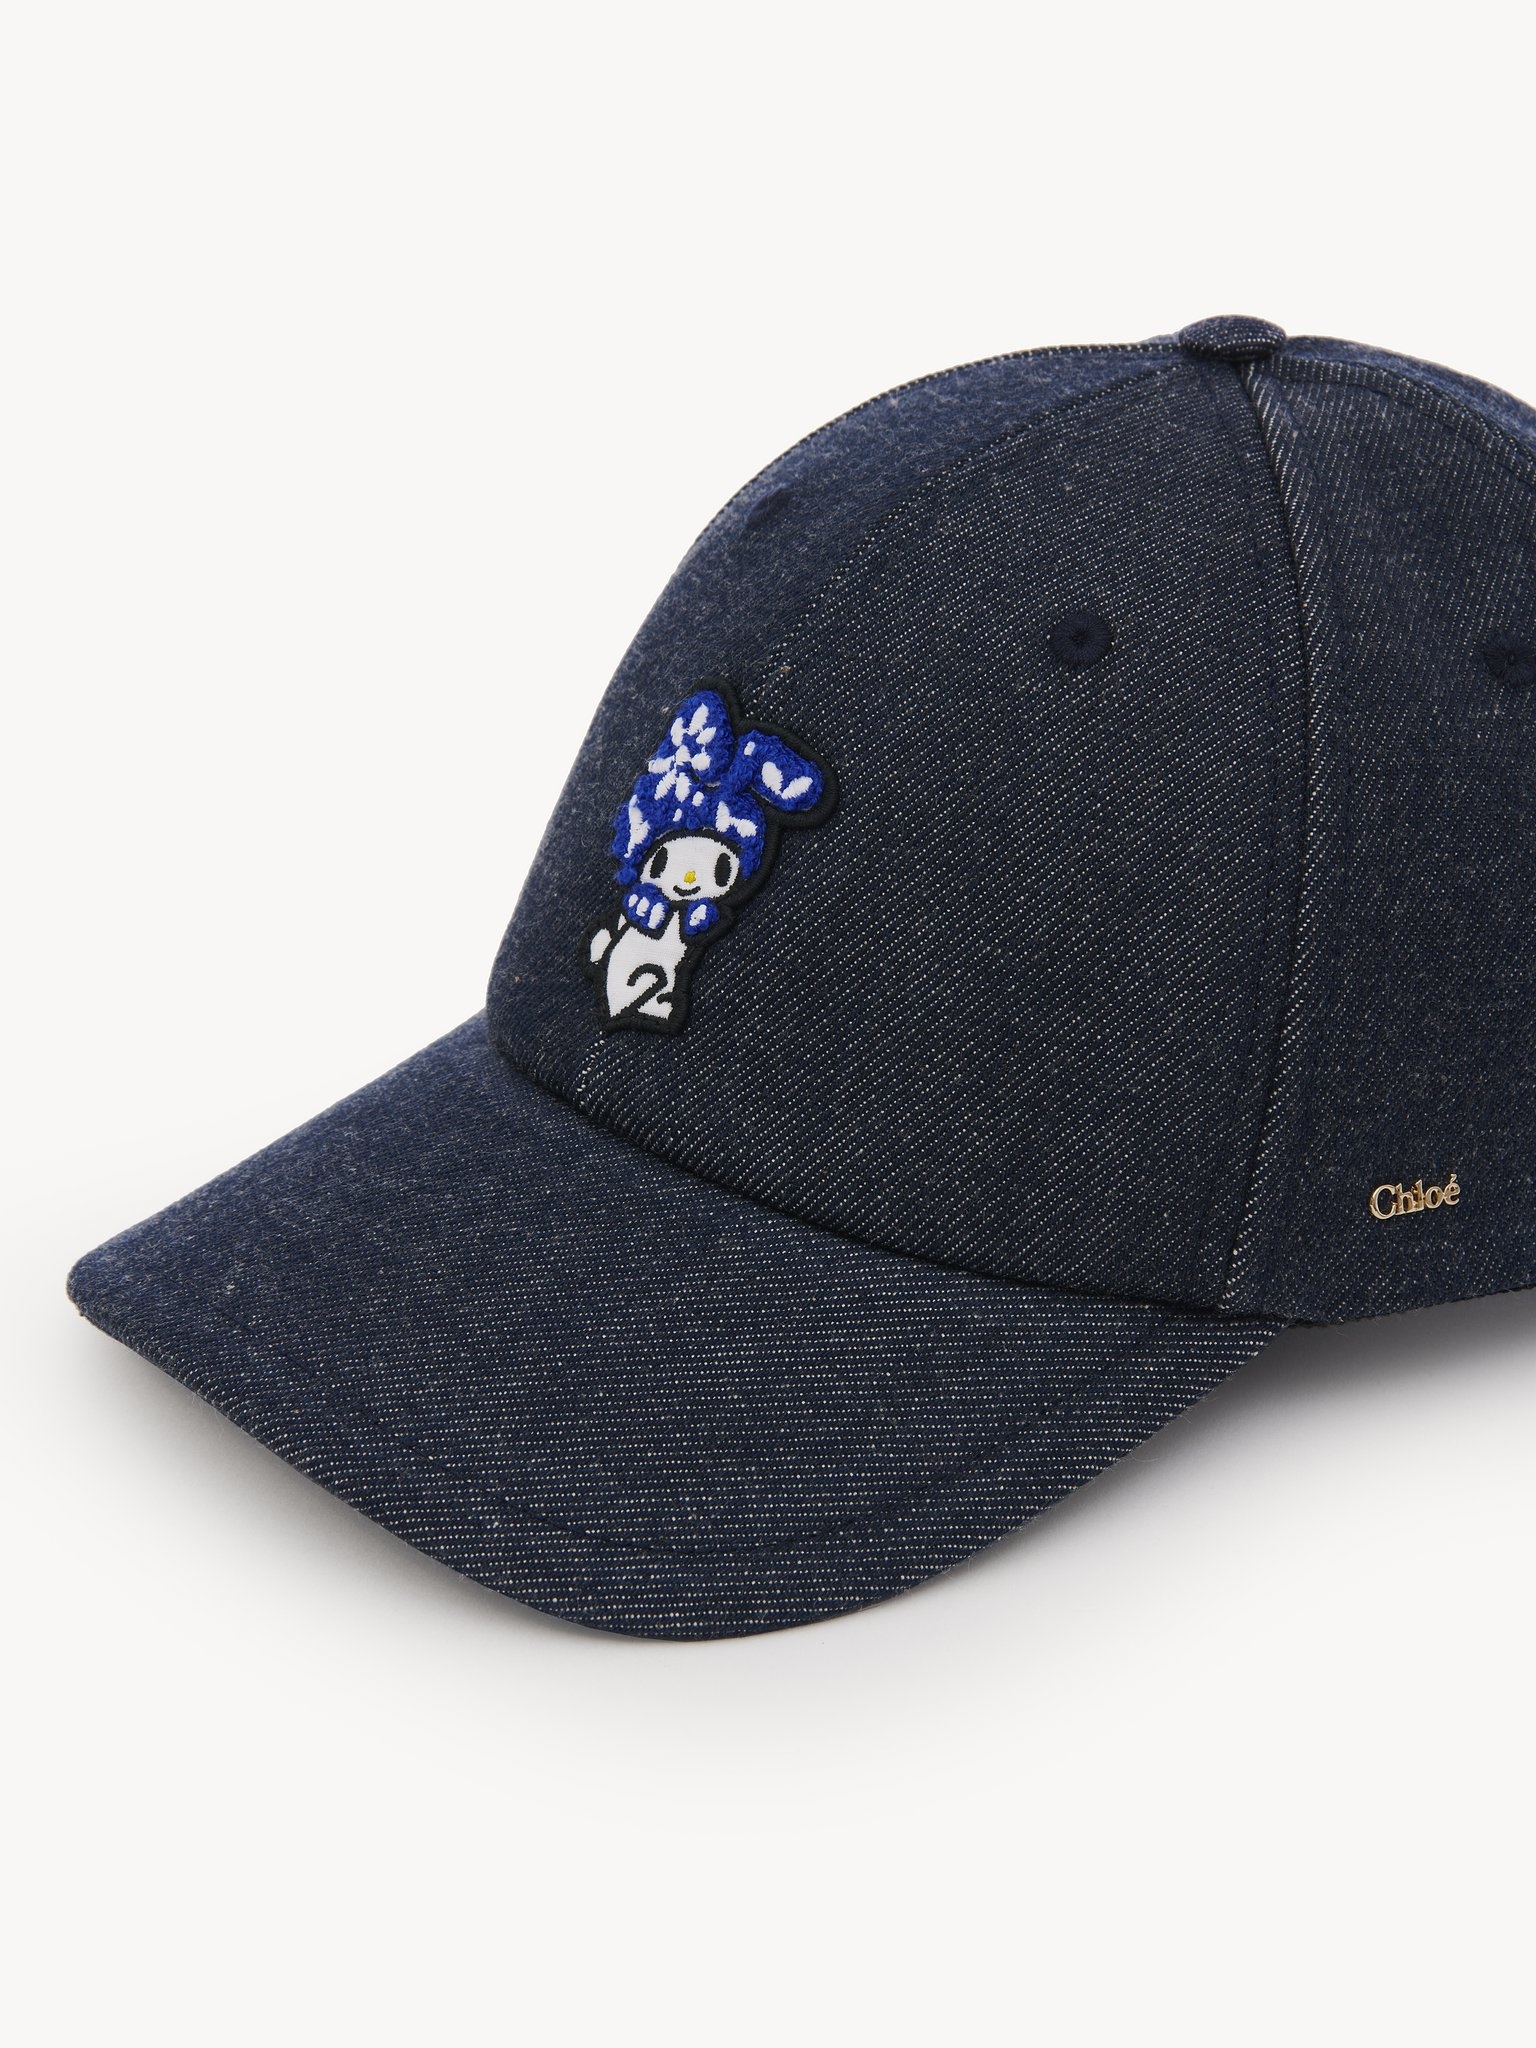 MY MELODY FOR CHLOÉ CAP - 3